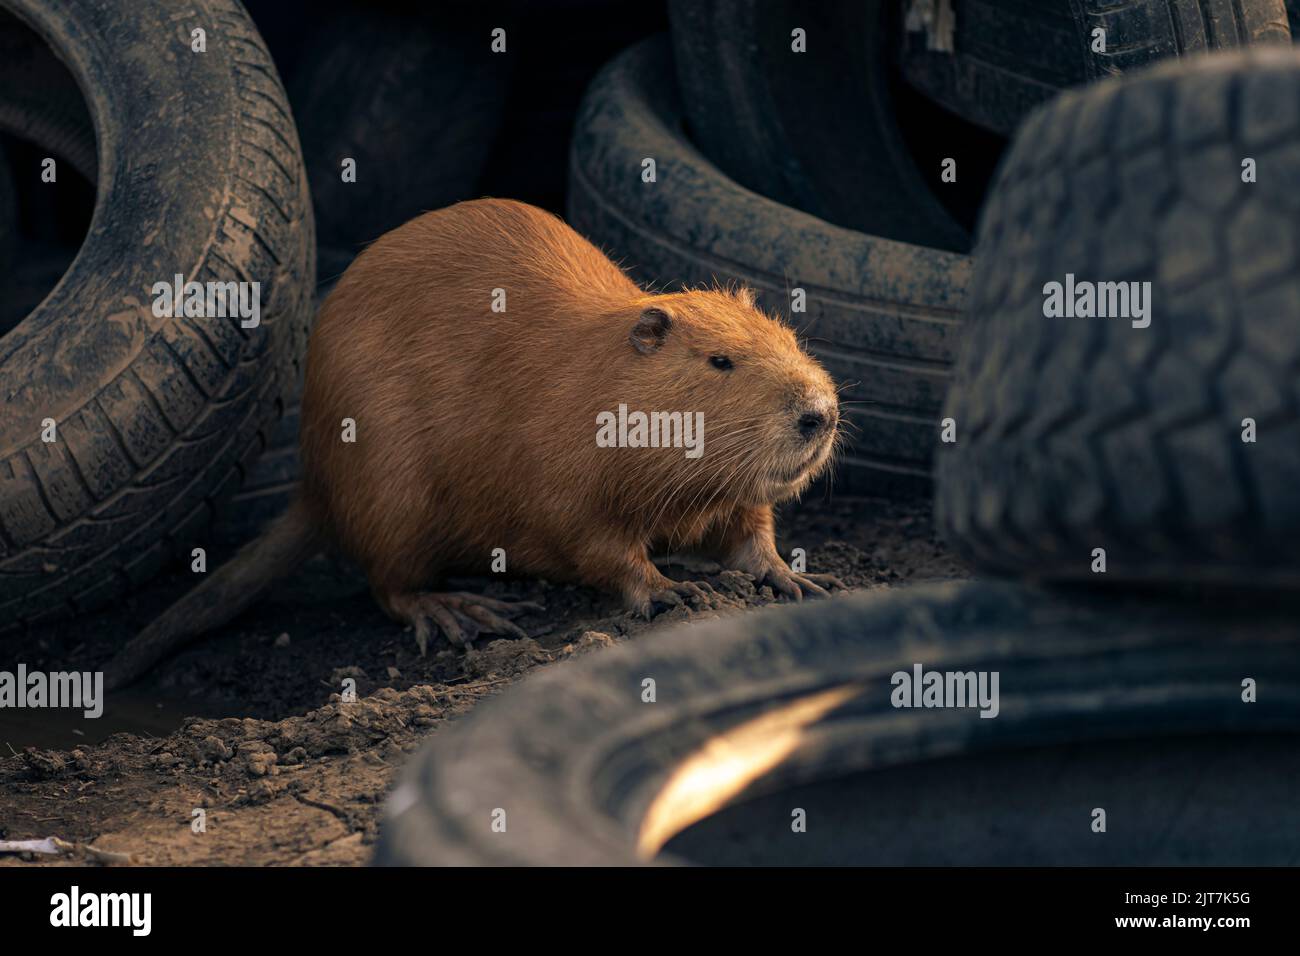 Surprising close up face to face meeting with coyp Myocastor coypus living in junk heap with wasted tires far from river. Wildlife secundary habitat Stock Photo